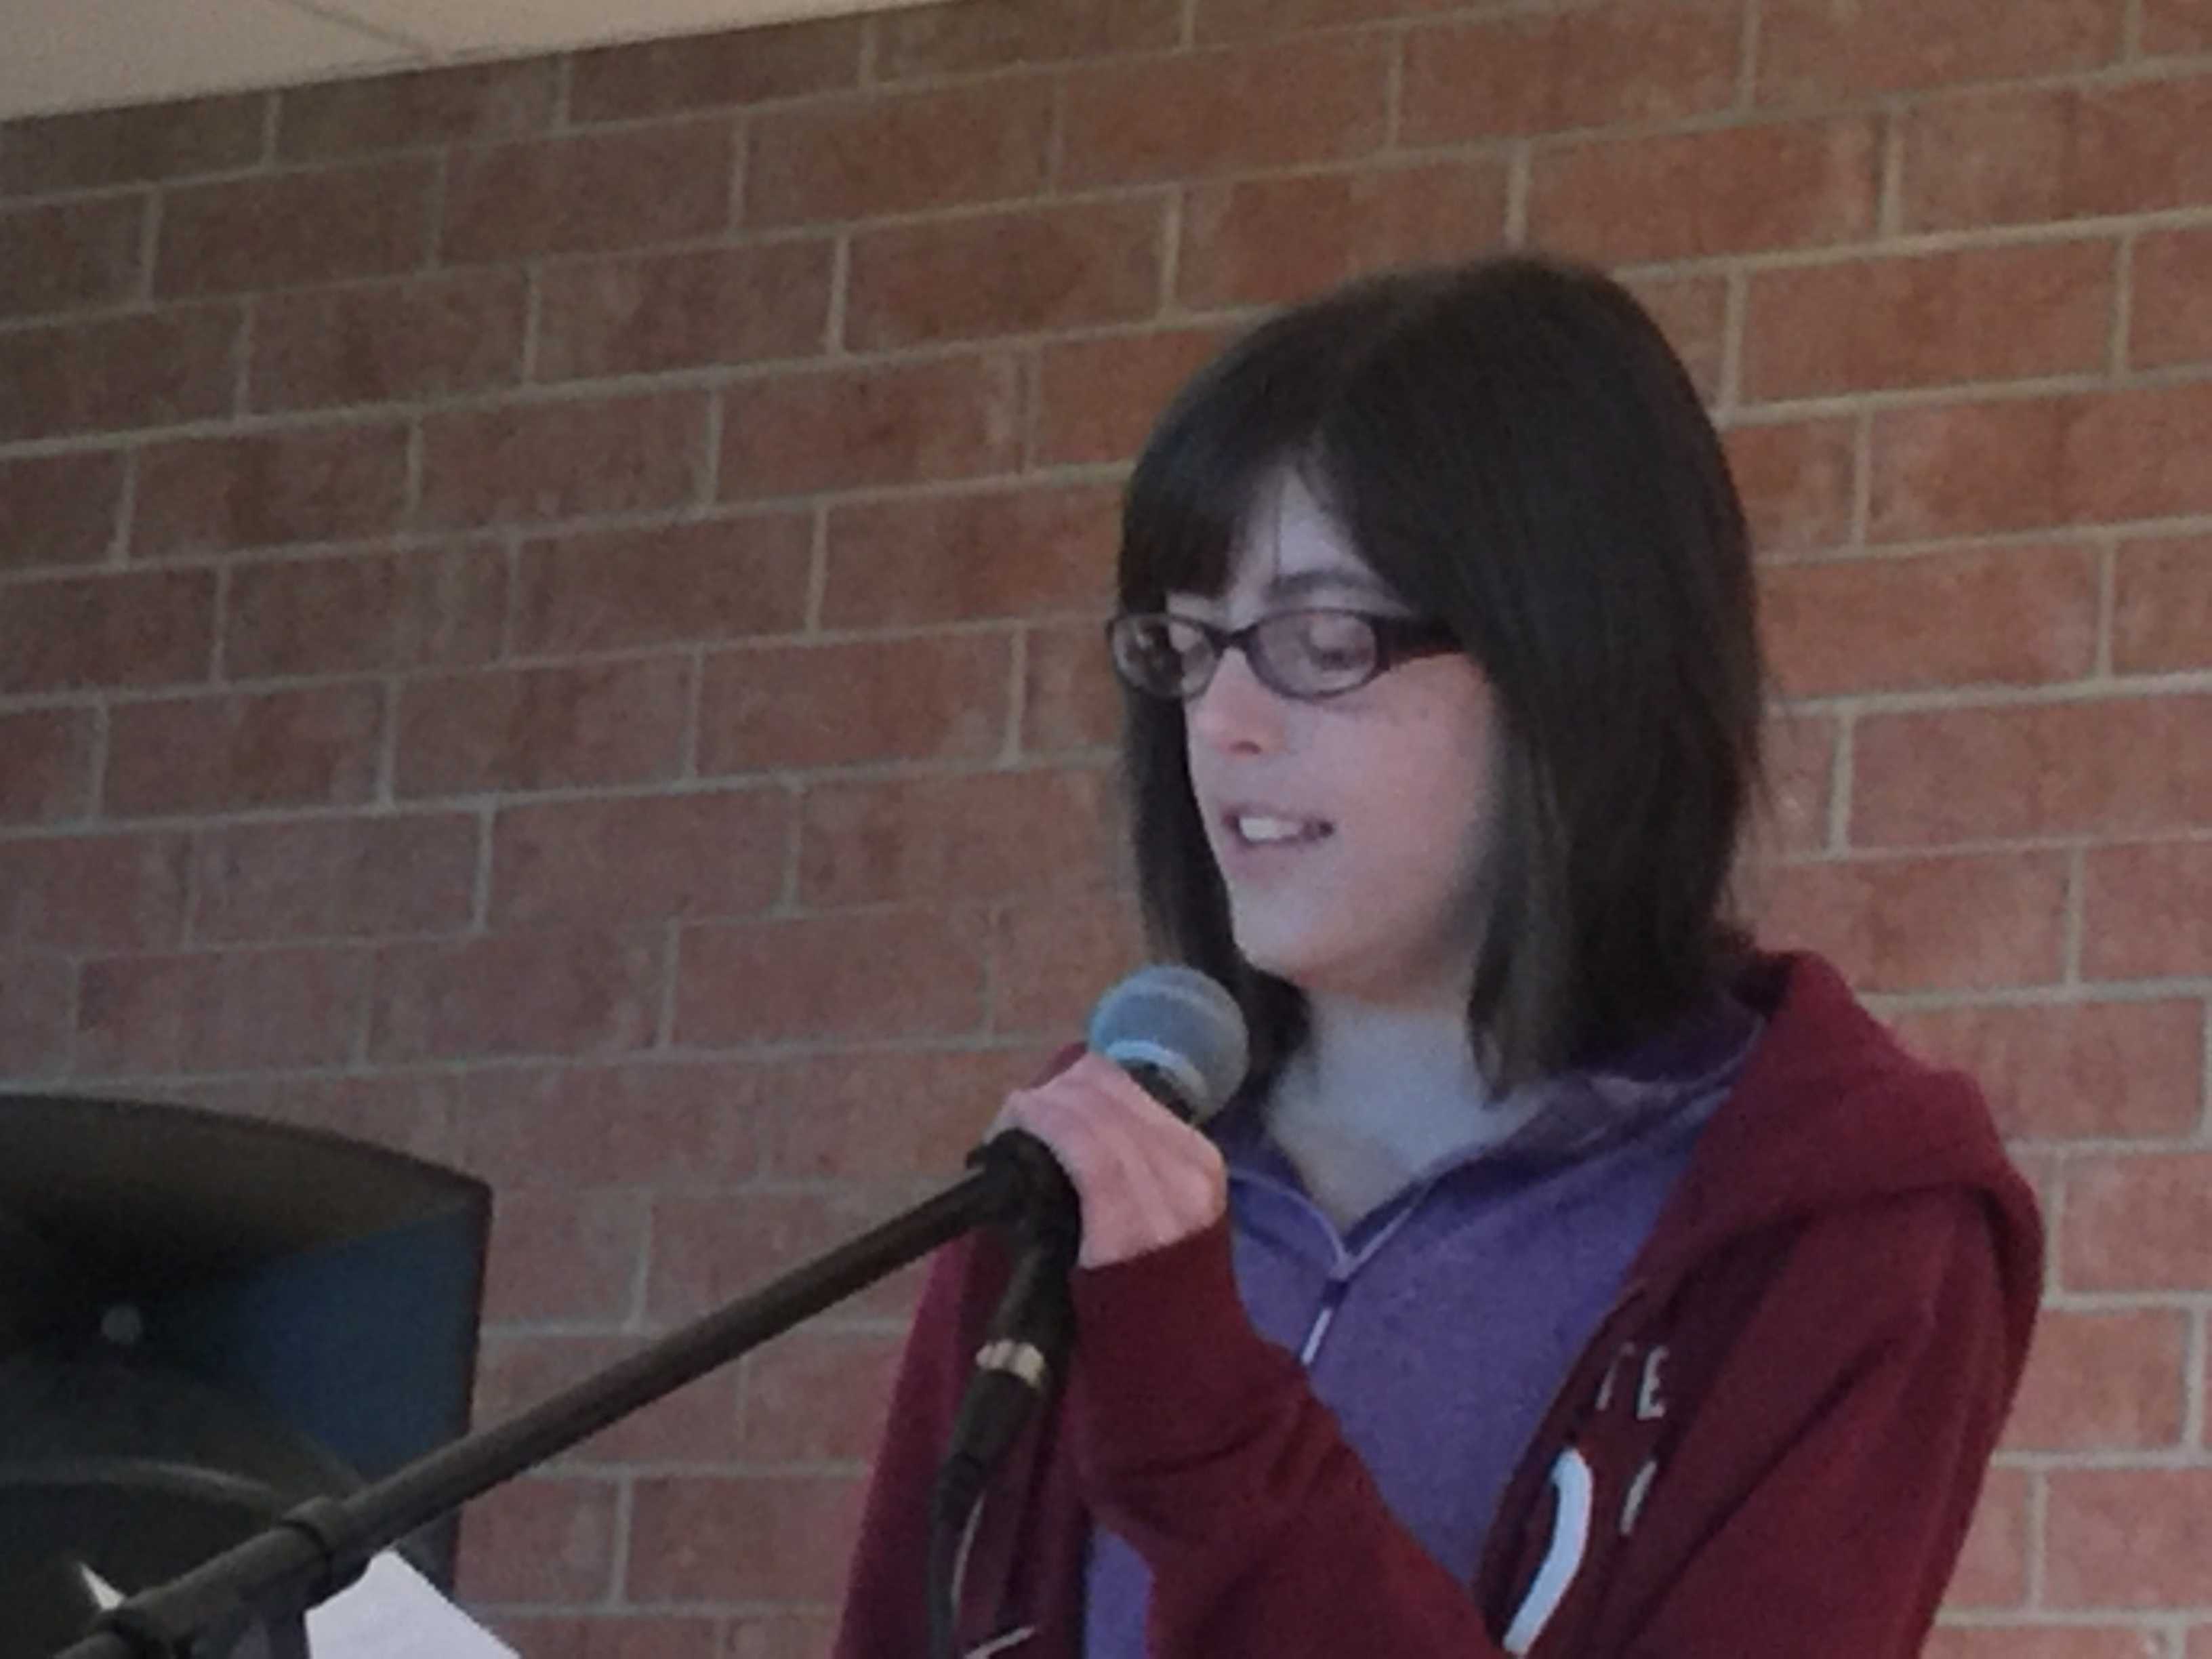 Hannah Bentley, sophomore, presents her poem "And the Giraffes Are Eaten Alive" at HHS Unplugged. Bentley wrote the poem in her bedroom a couple of days before the event occurred. "I was really nervous, but it was nice to be able to perform my piece," Bentley stated. 